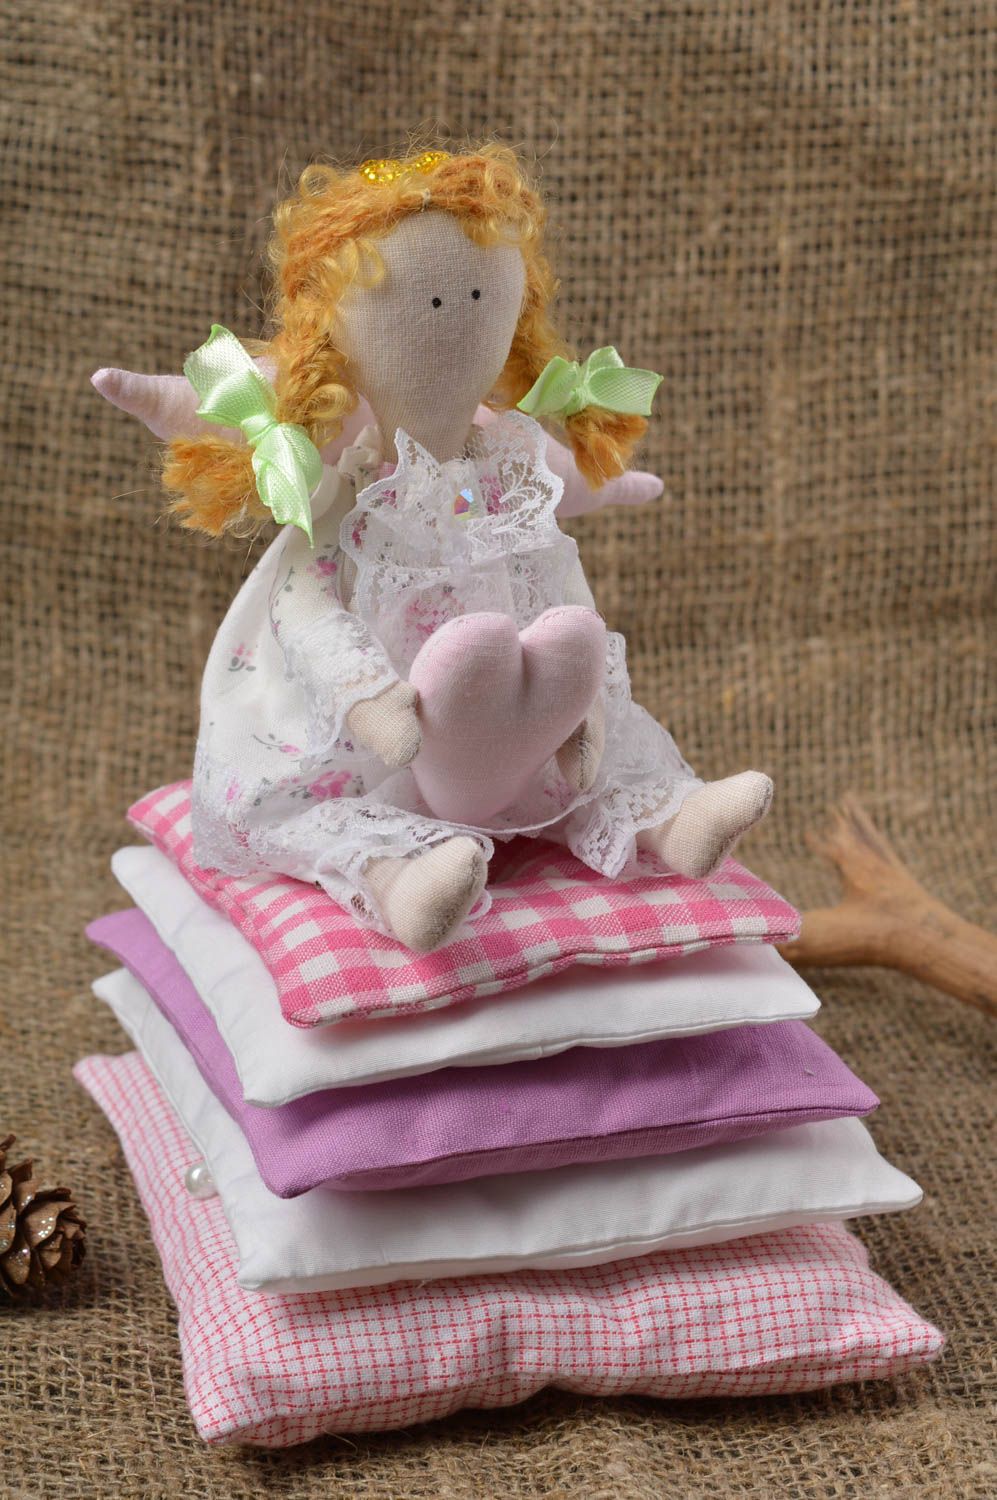 Handmade doll unusual doll with pillow designer toy for girl nursery decor photo 1